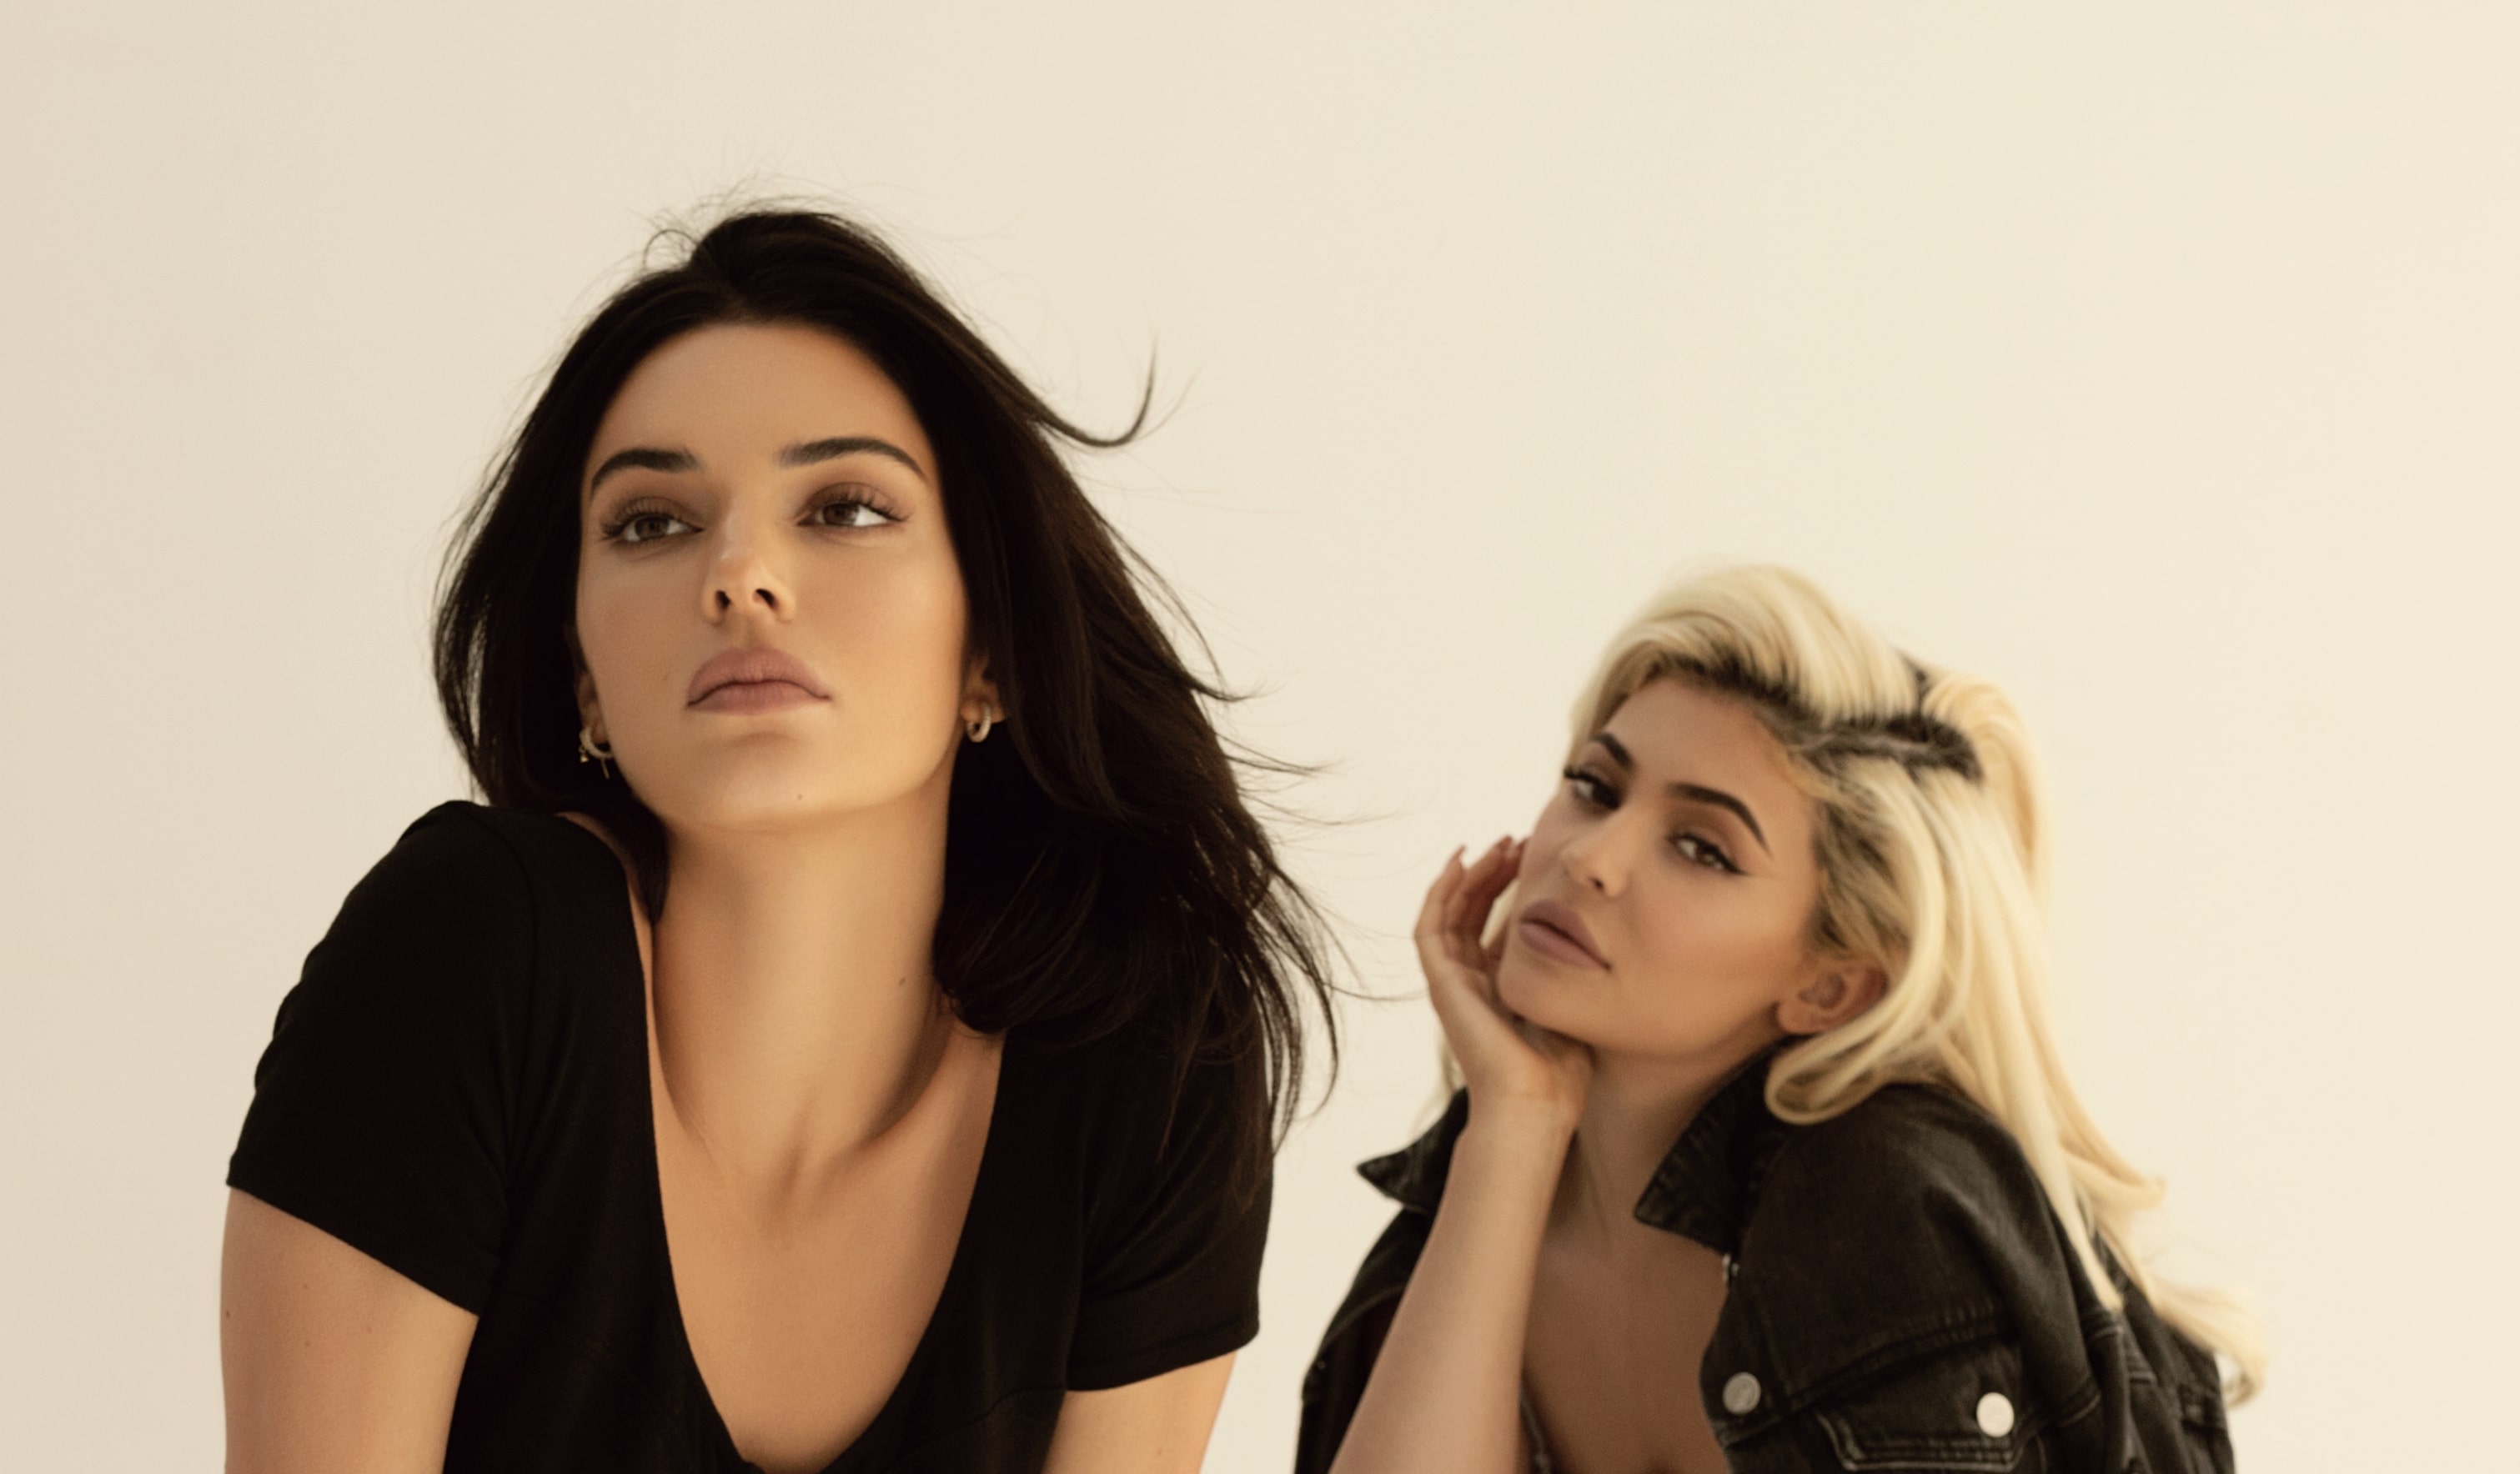 Are you ready for Kendall and Kylie Jenner’s brand of fashion?